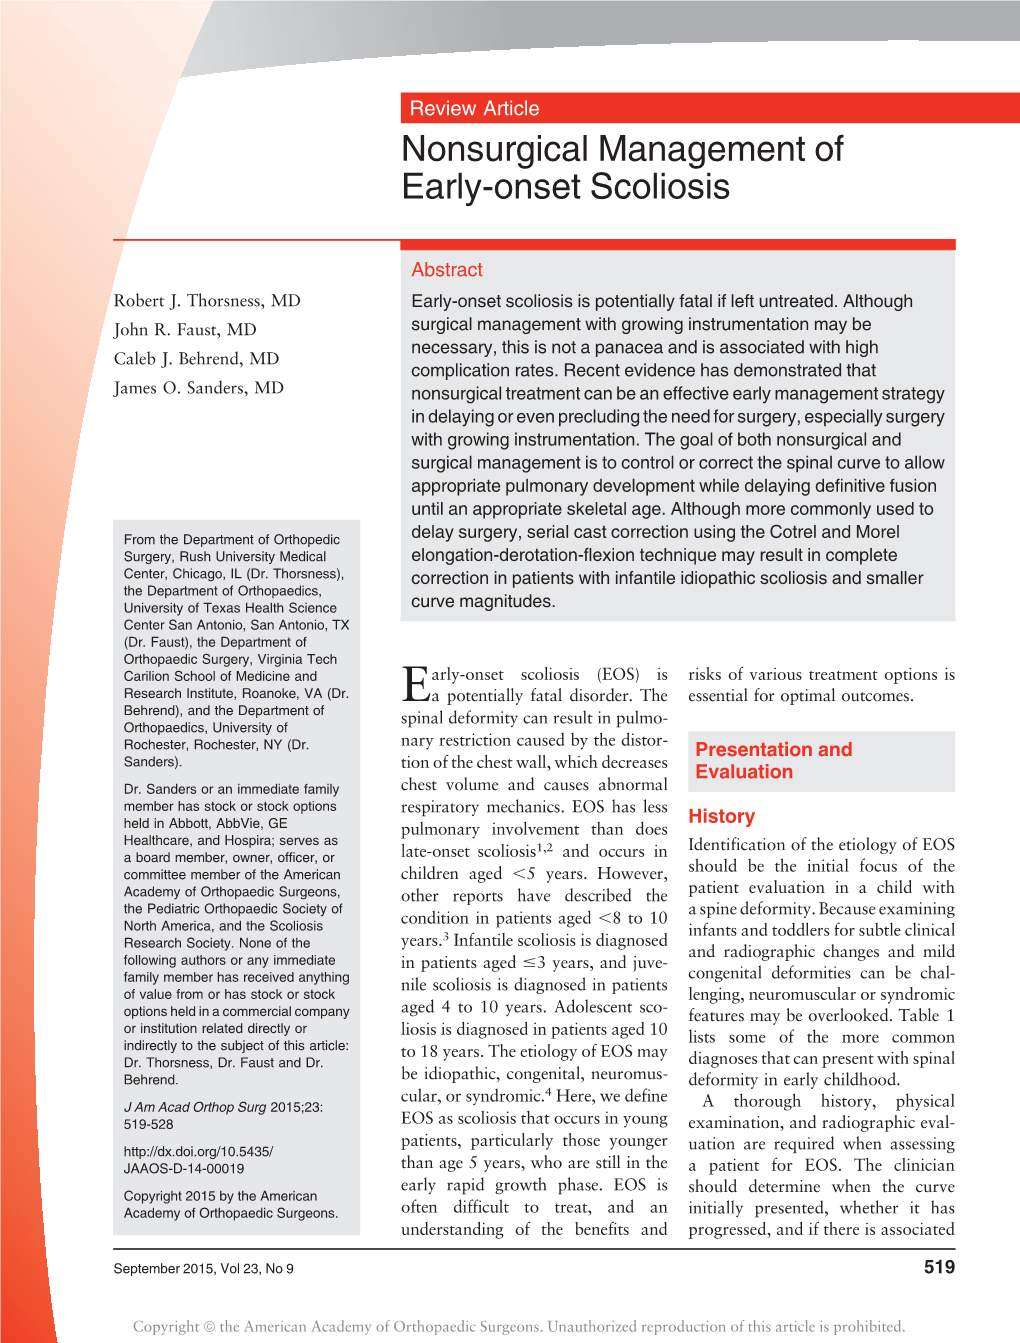 Nonsurgical Management of Early-Onset Scoliosis